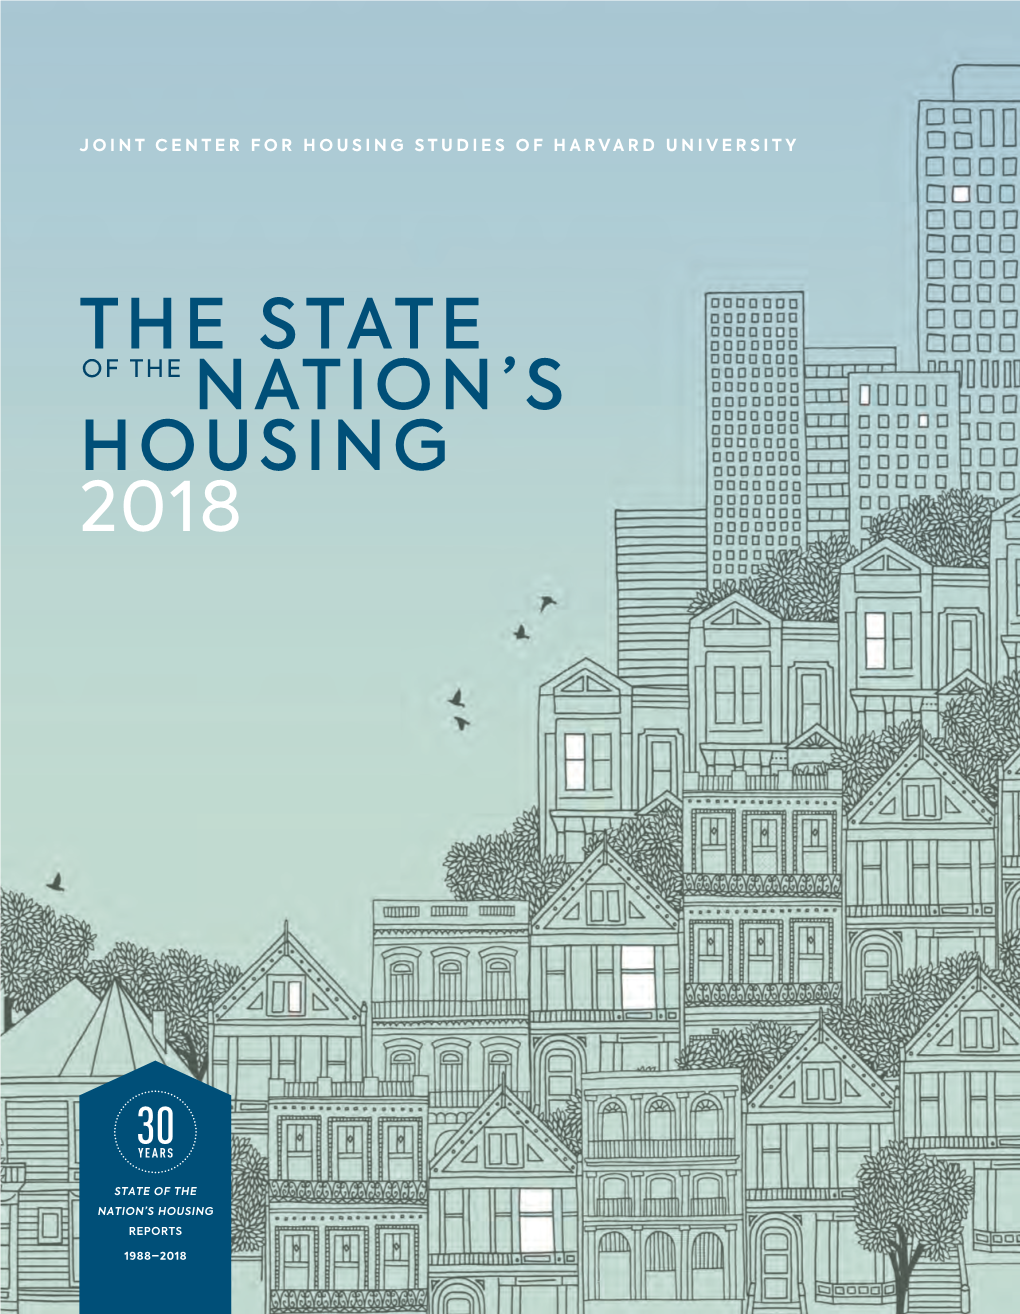 The State Nation's Housing 2018